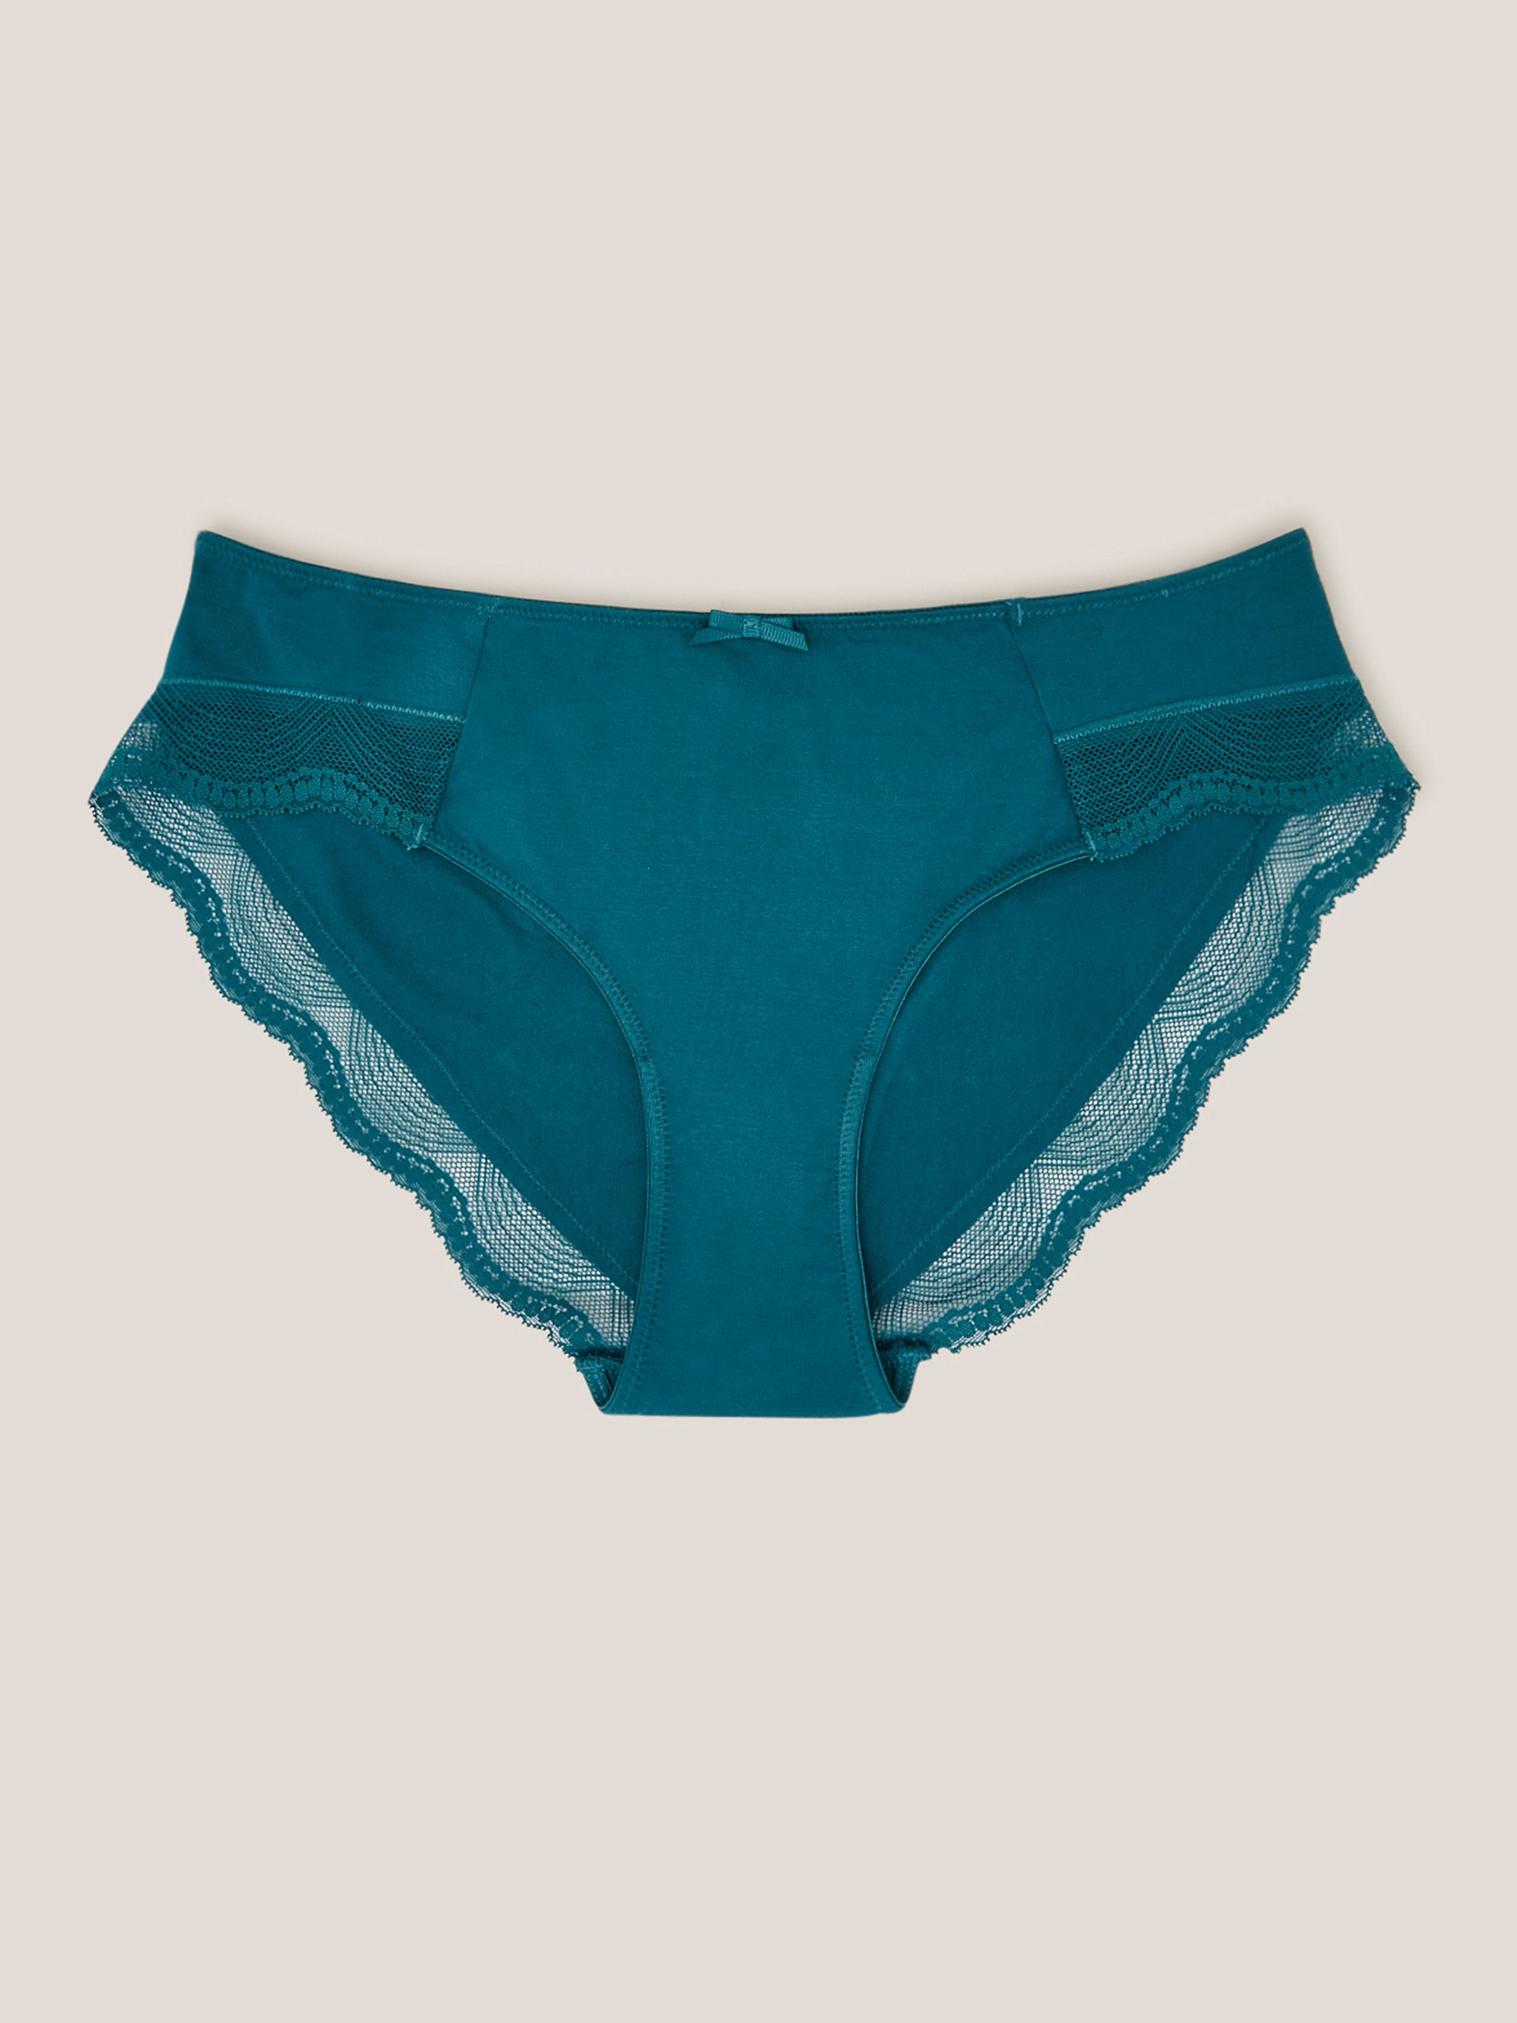 Shortie in MID TEAL - FLAT FRONT